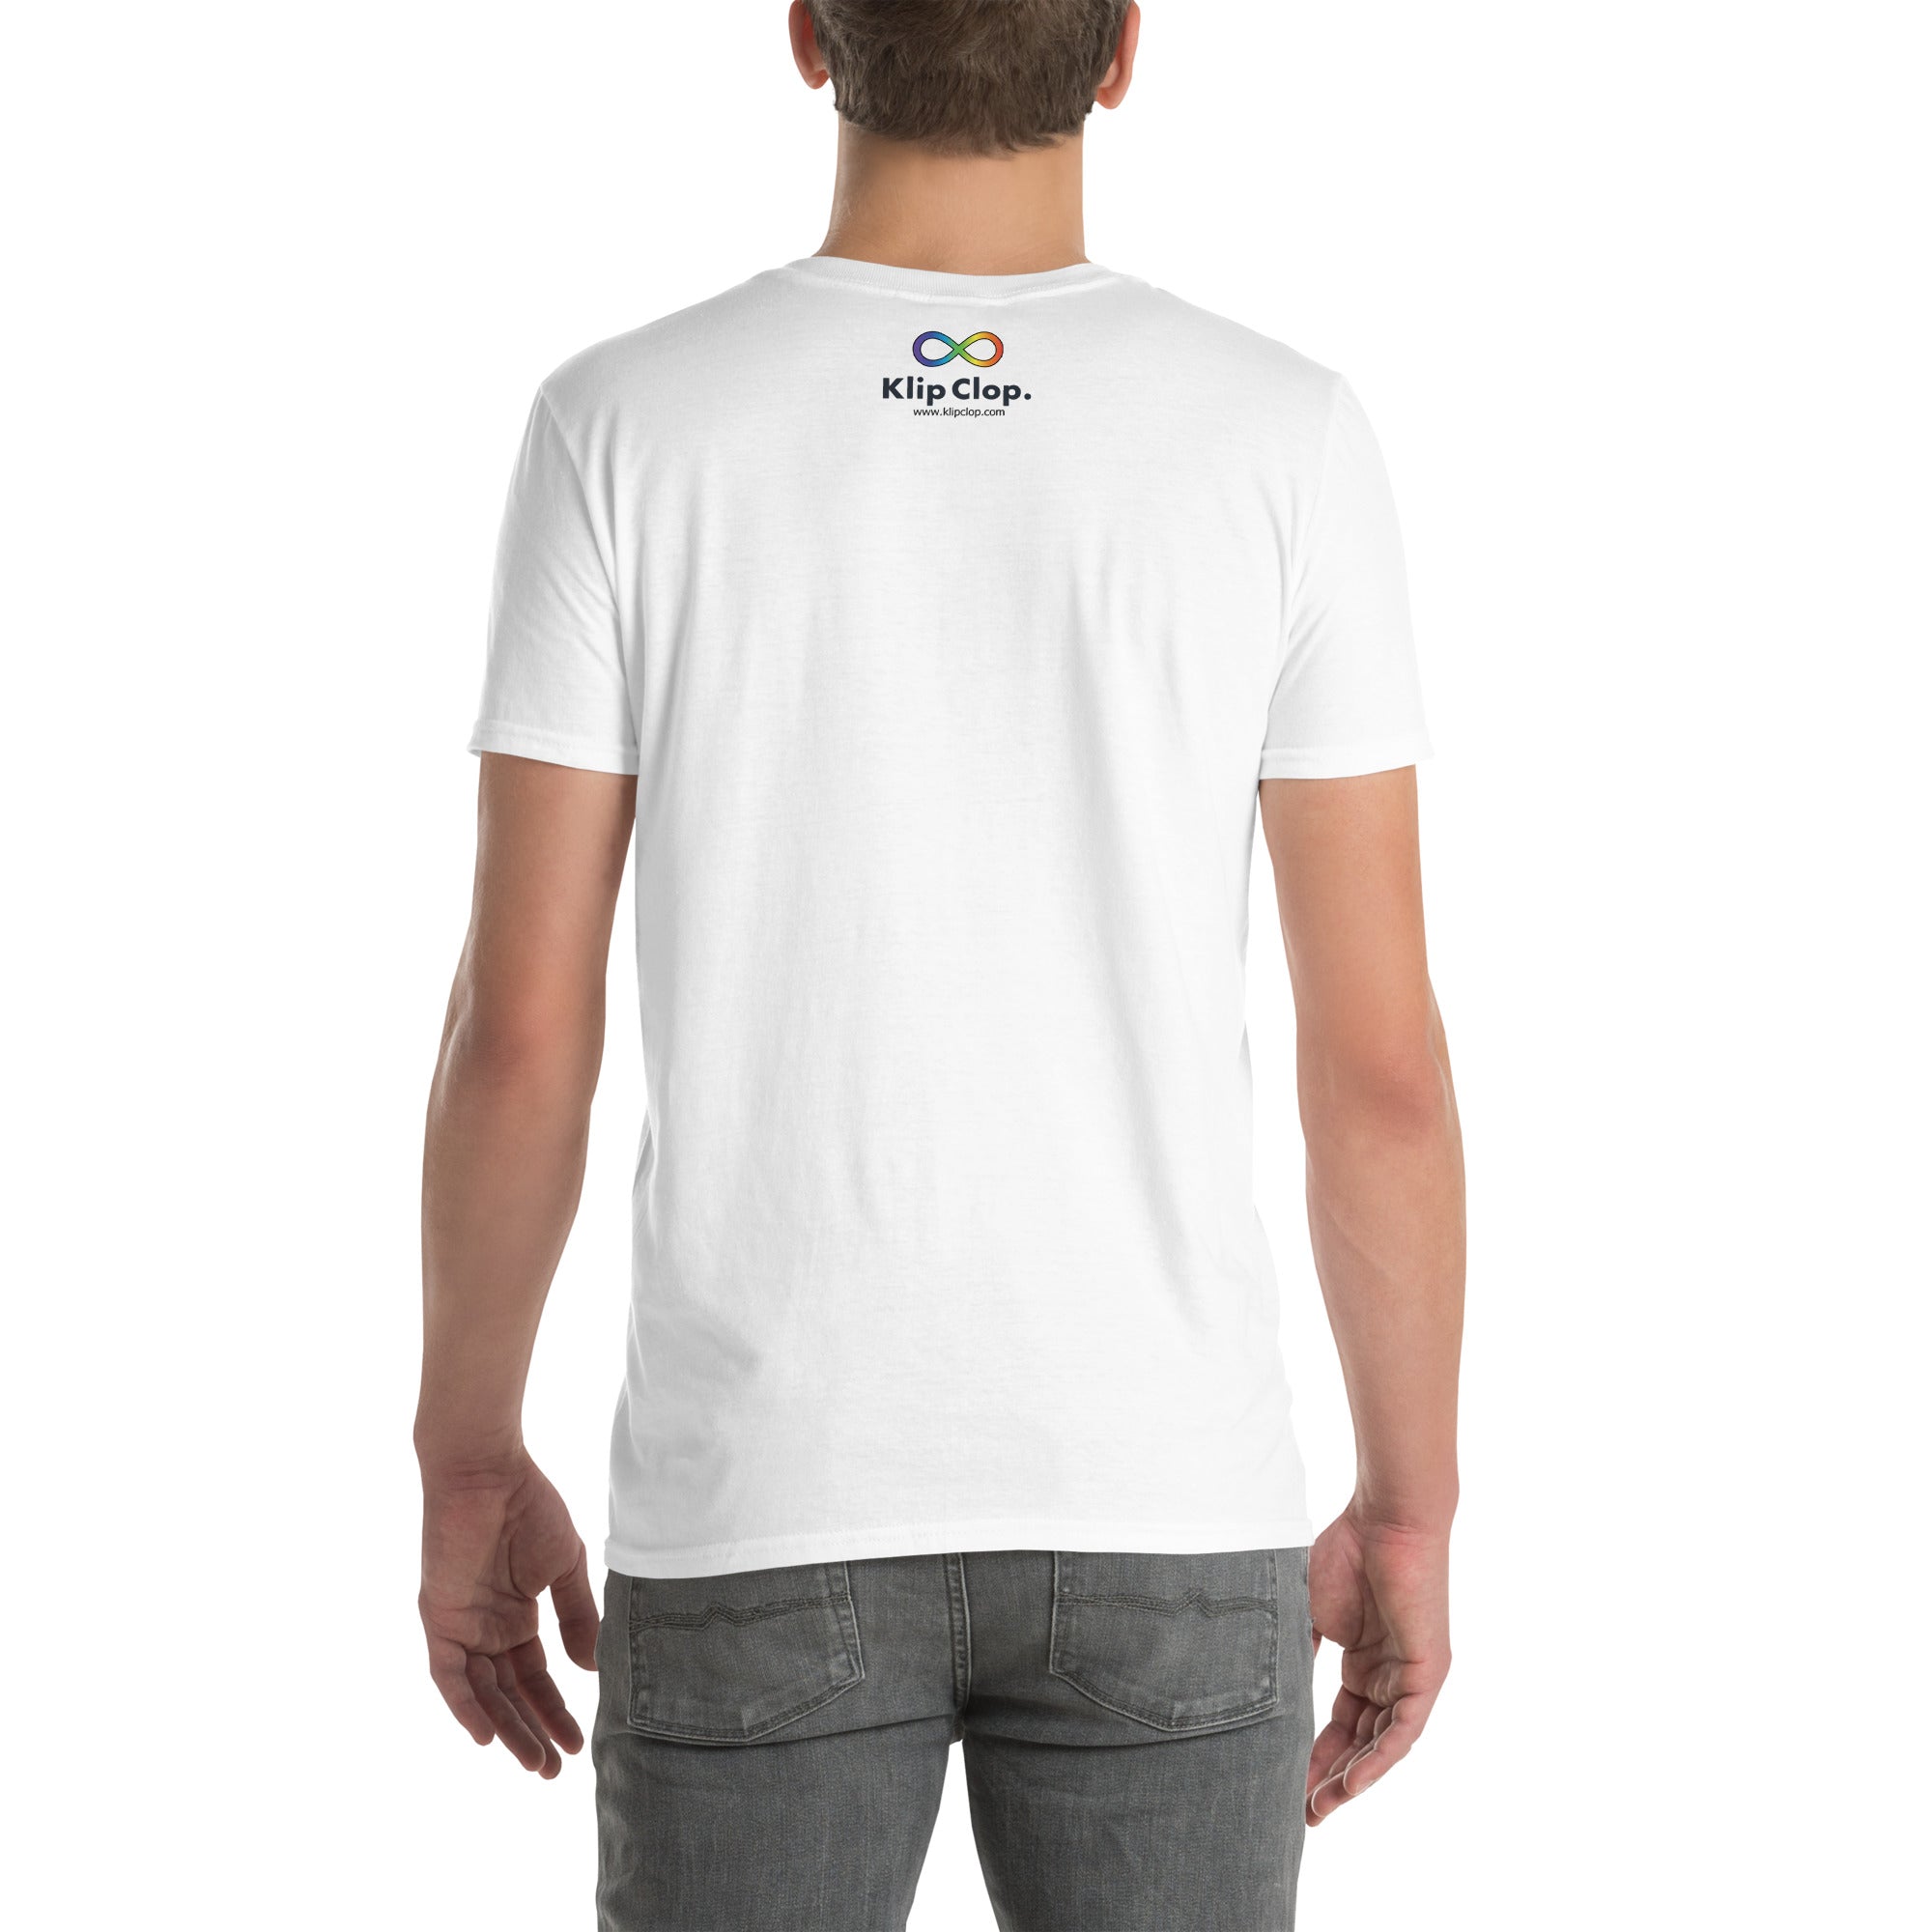 Short-Sleeve Unisex T-Shirt- ADHD- Learn To Harness the Power